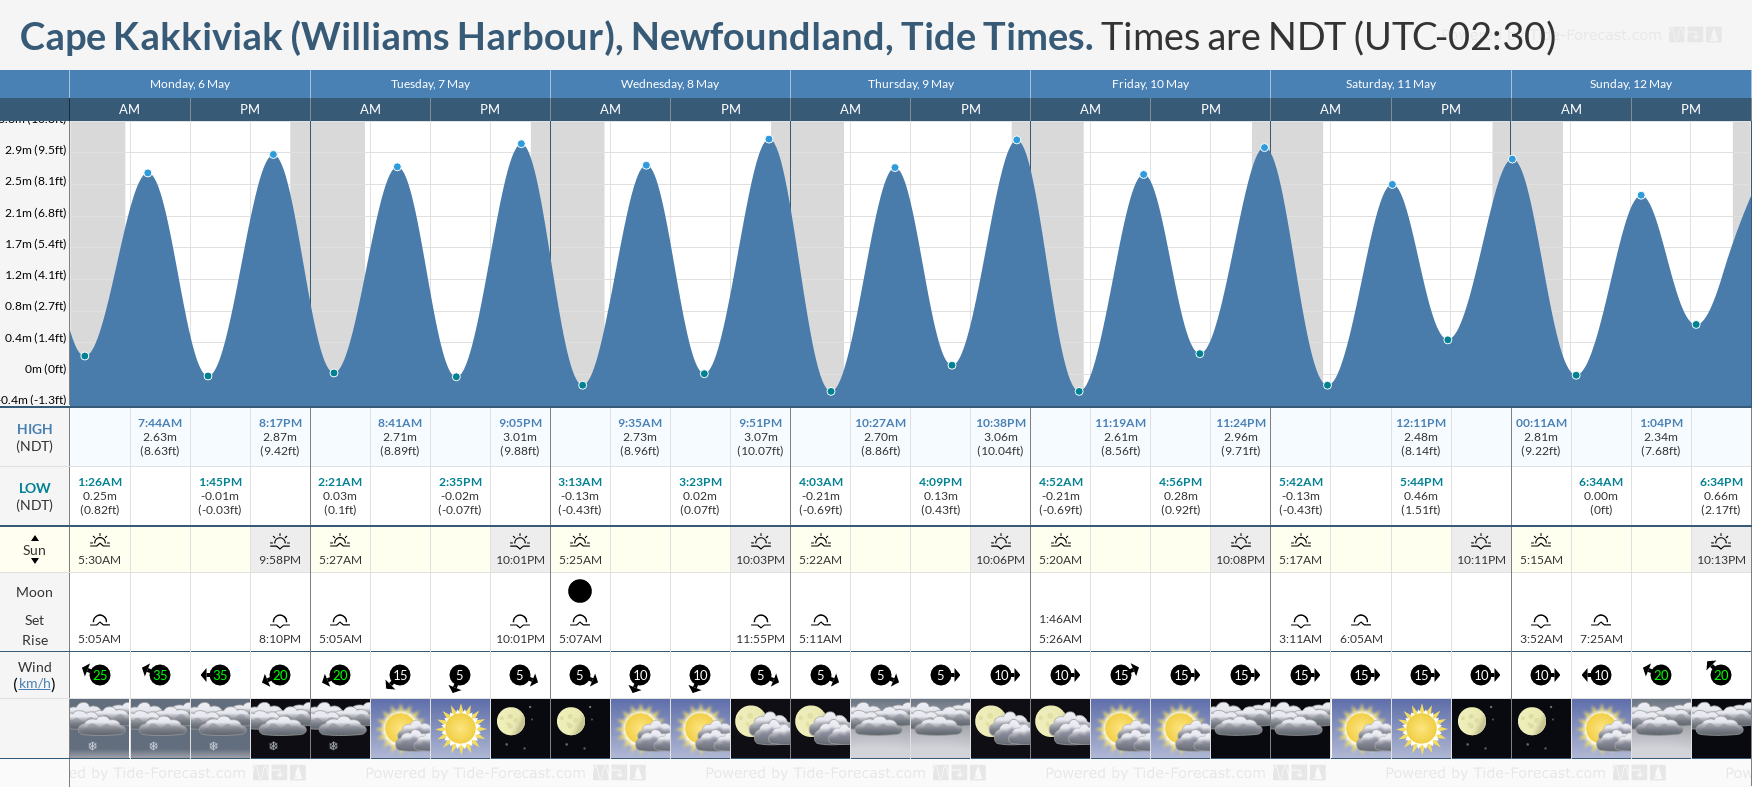 Cape Kakkiviak (Williams Harbour), Newfoundland Tide Chart including high and low tide tide times for the next 7 days